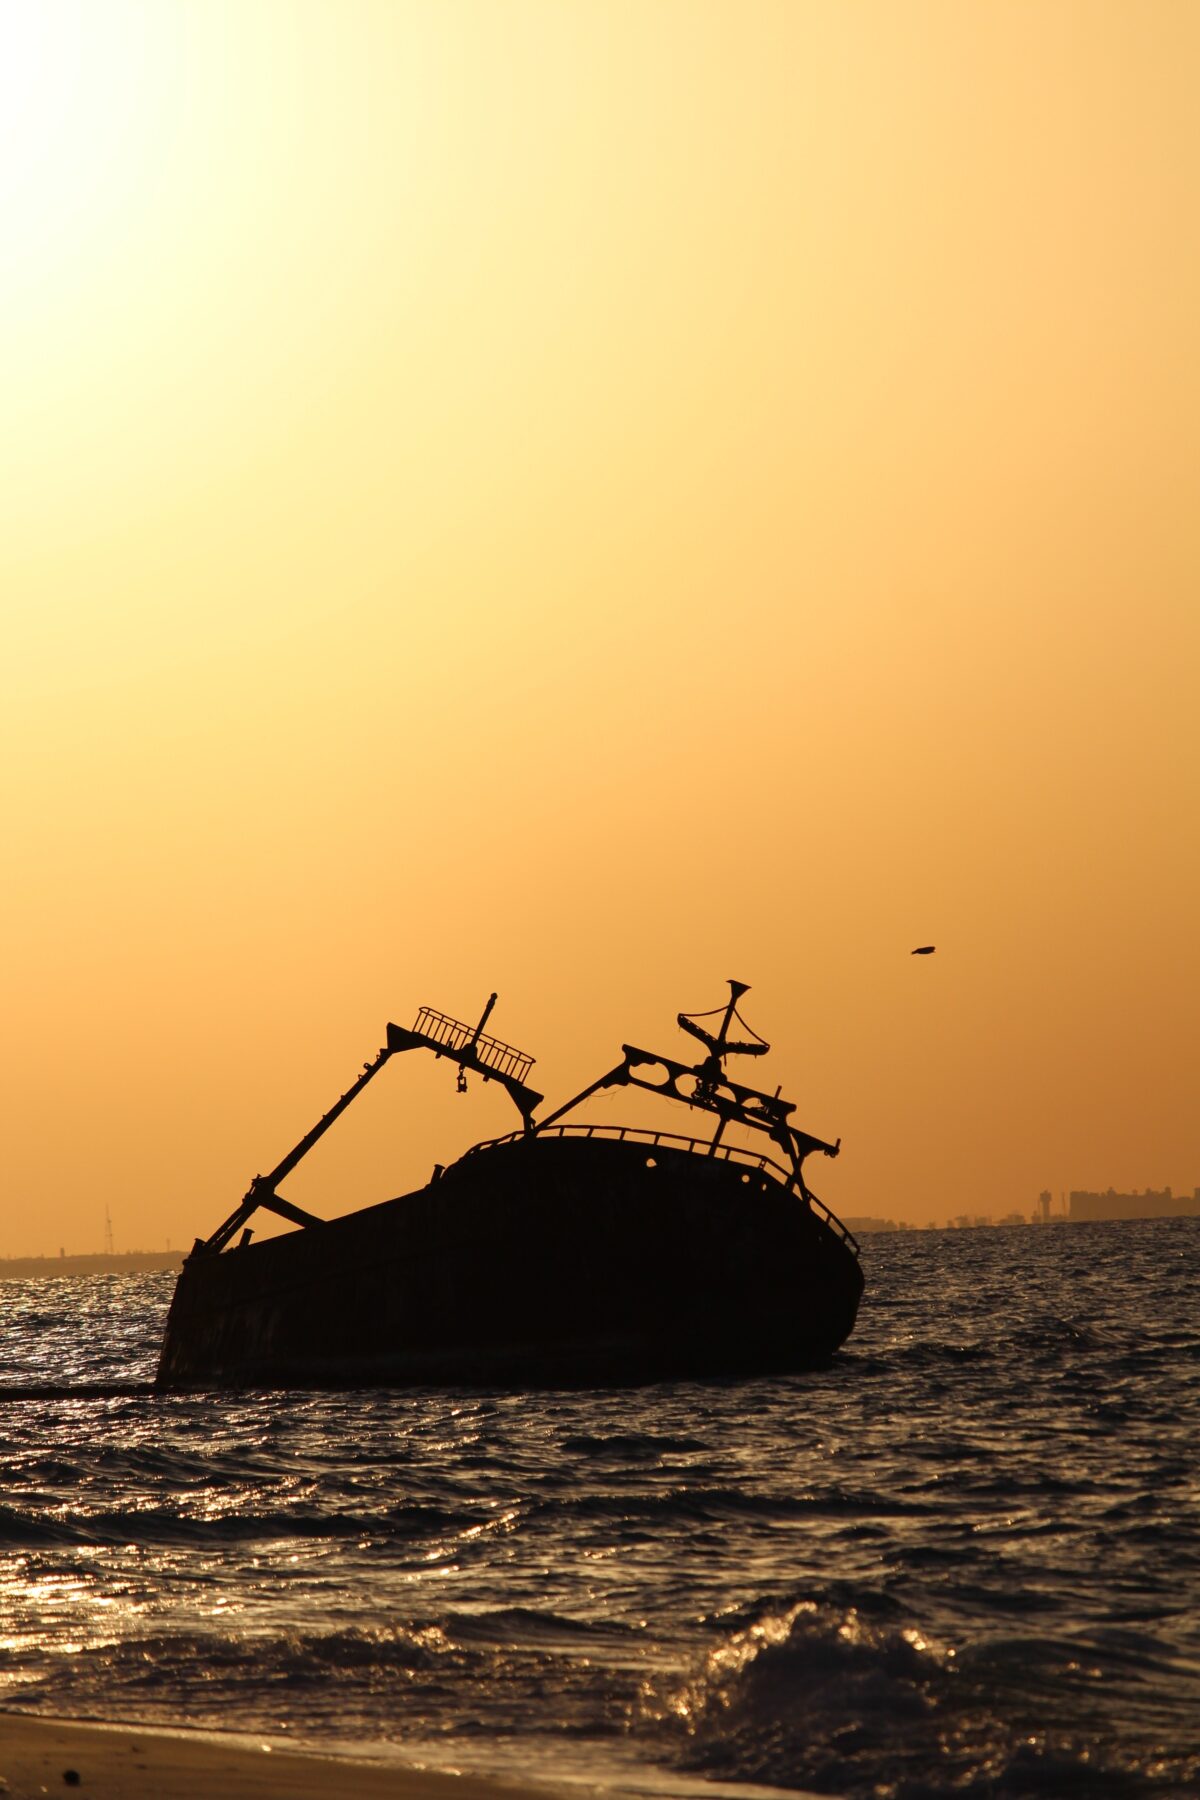 A foundering ship at sunset.